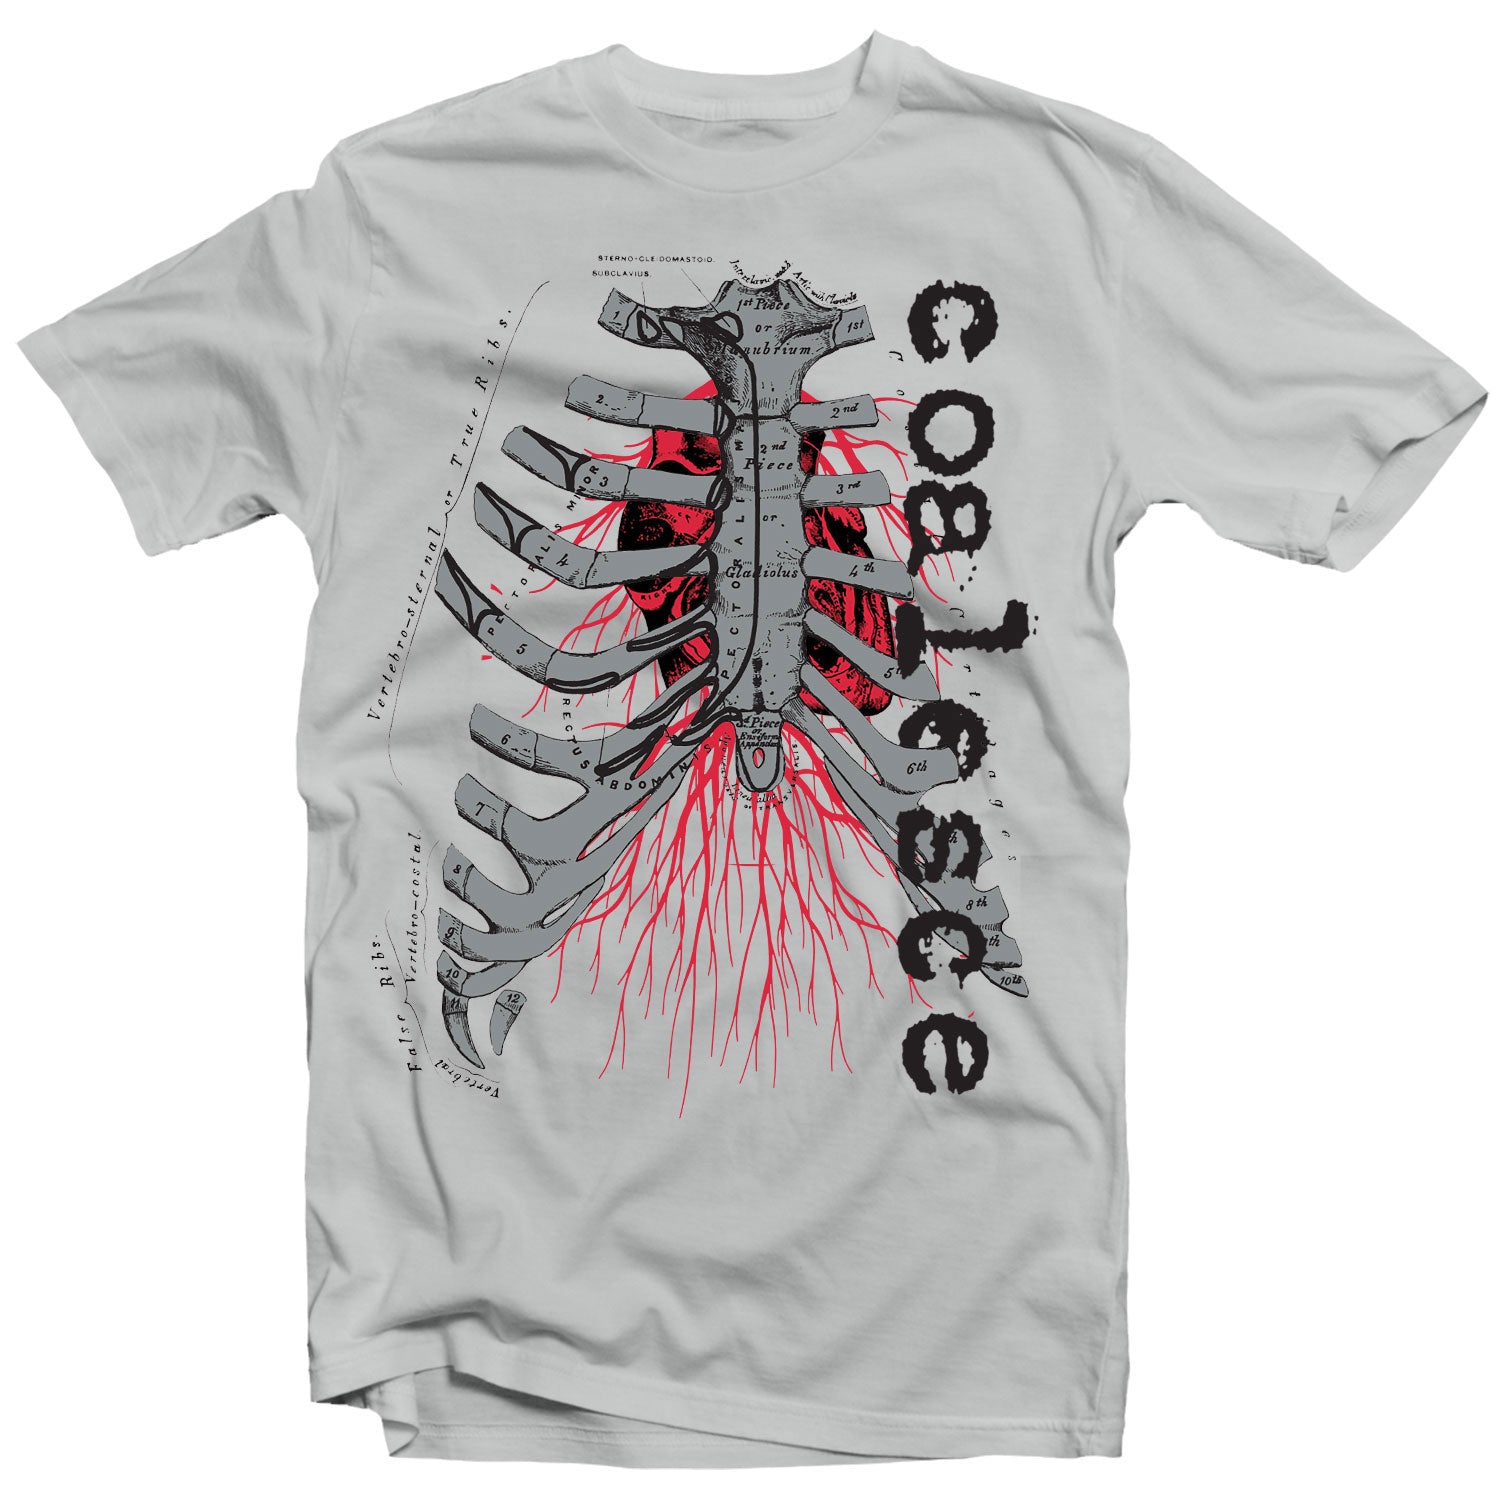 Coalesce "Functioning On Impatience" T-Shirt